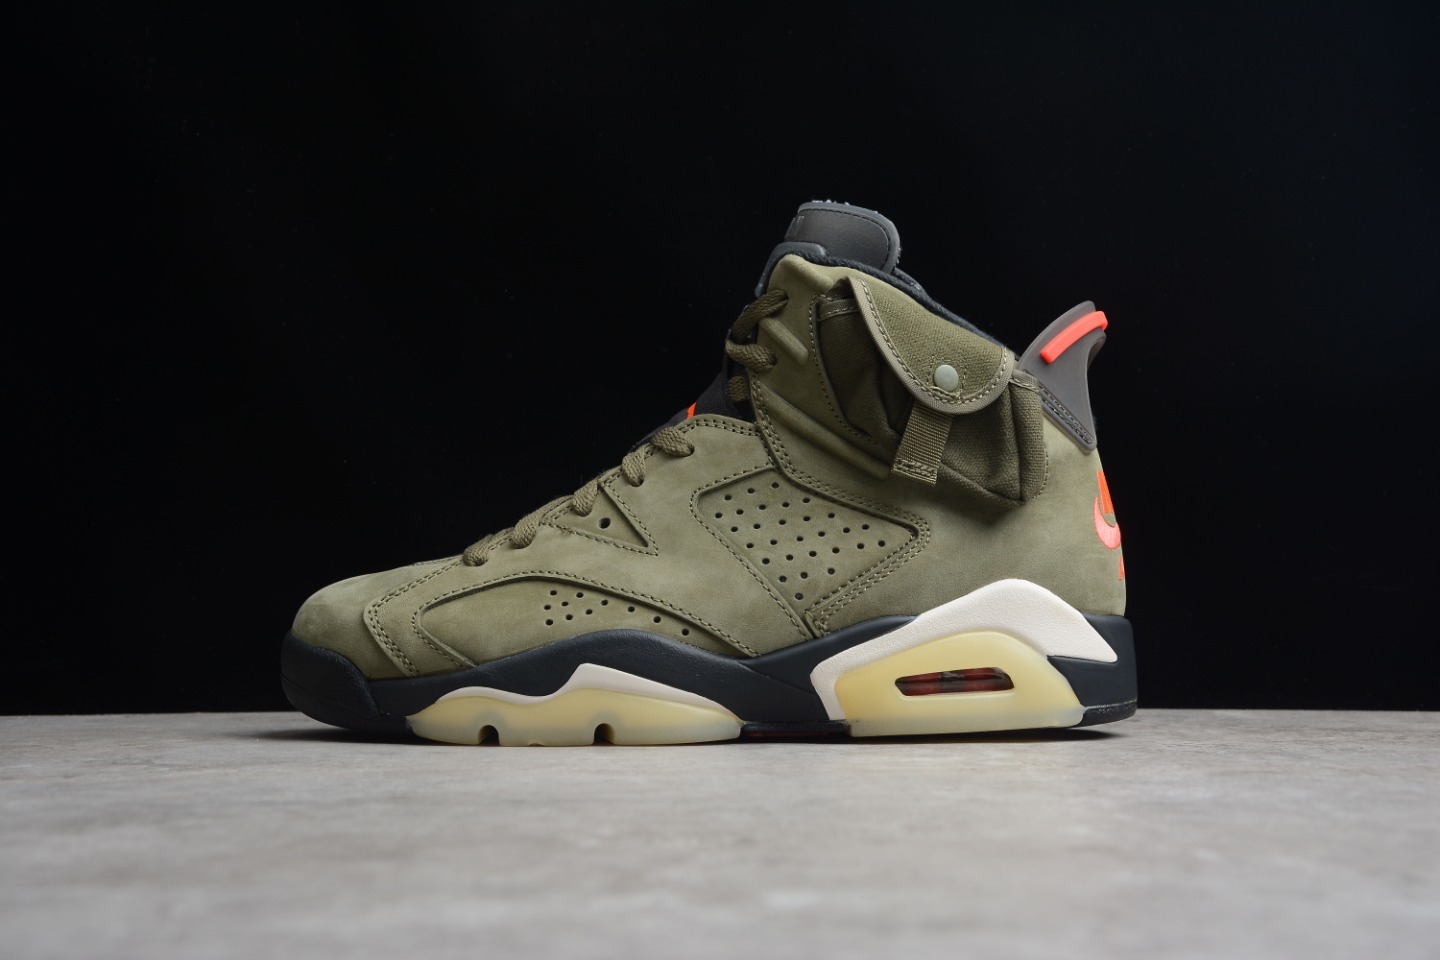 Is the Air Jordan 6 size too big or too small?